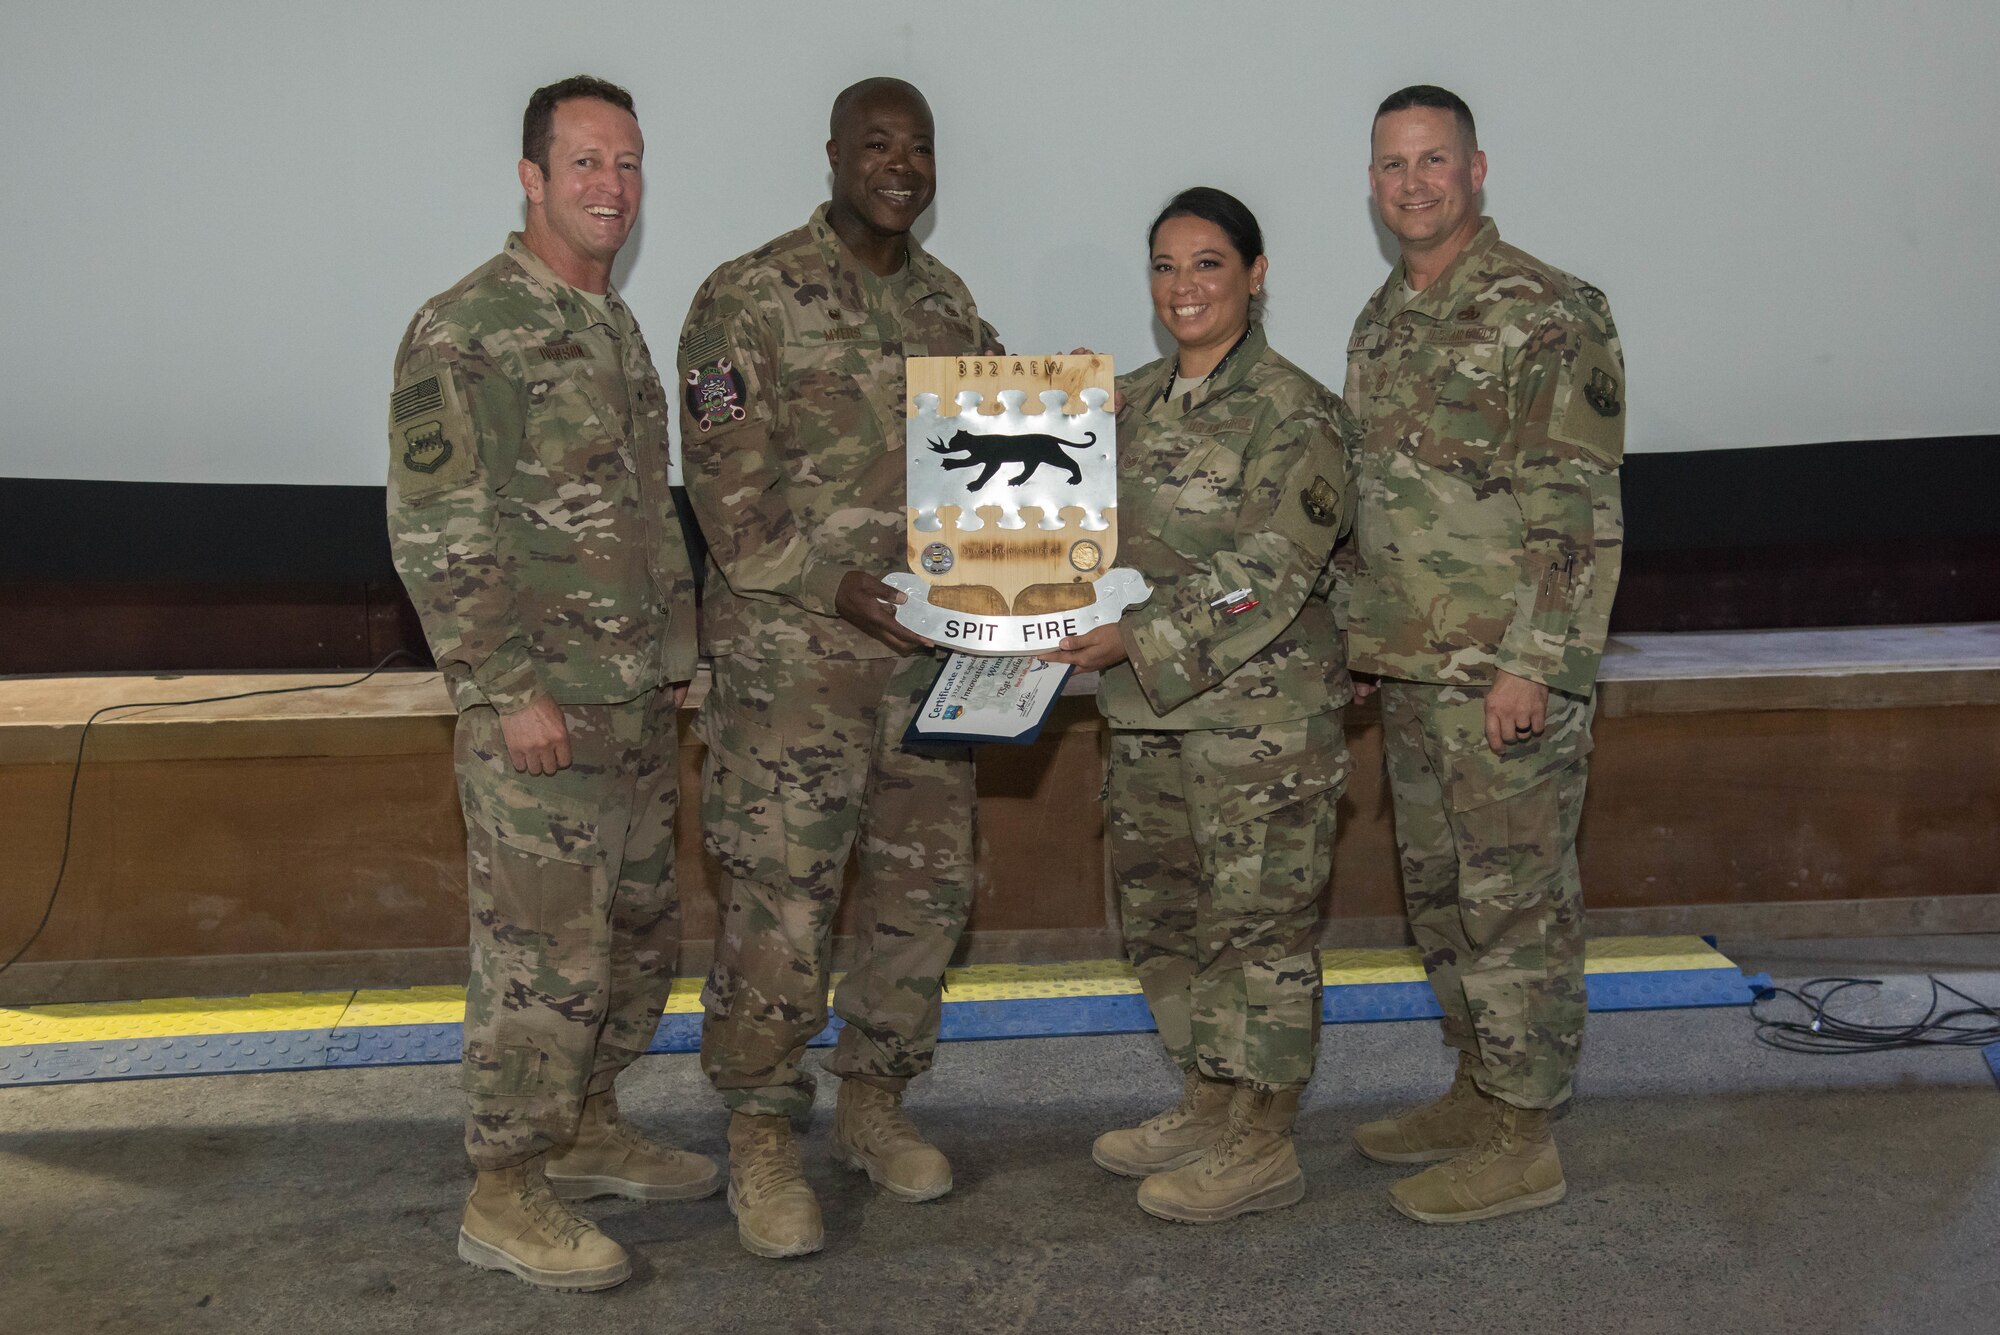 Brig. Gen. David Iverson, 332nd Air Expeditionary Wing commander, and Chief Master Sgt. Jason Tiek, 332nd AEW command chief, present the Red Tails Commander’s Innovation Challenge traveling trophy to Tech. Sgt. Oralia Howard, 332nd Expeditionary Maintenance Group quality assurance chief inspector, and Col. Henry Myers Jr., 332nd EMXG commander, Sept. 28, 2018 at an undisclosed location in Southwest Asia.